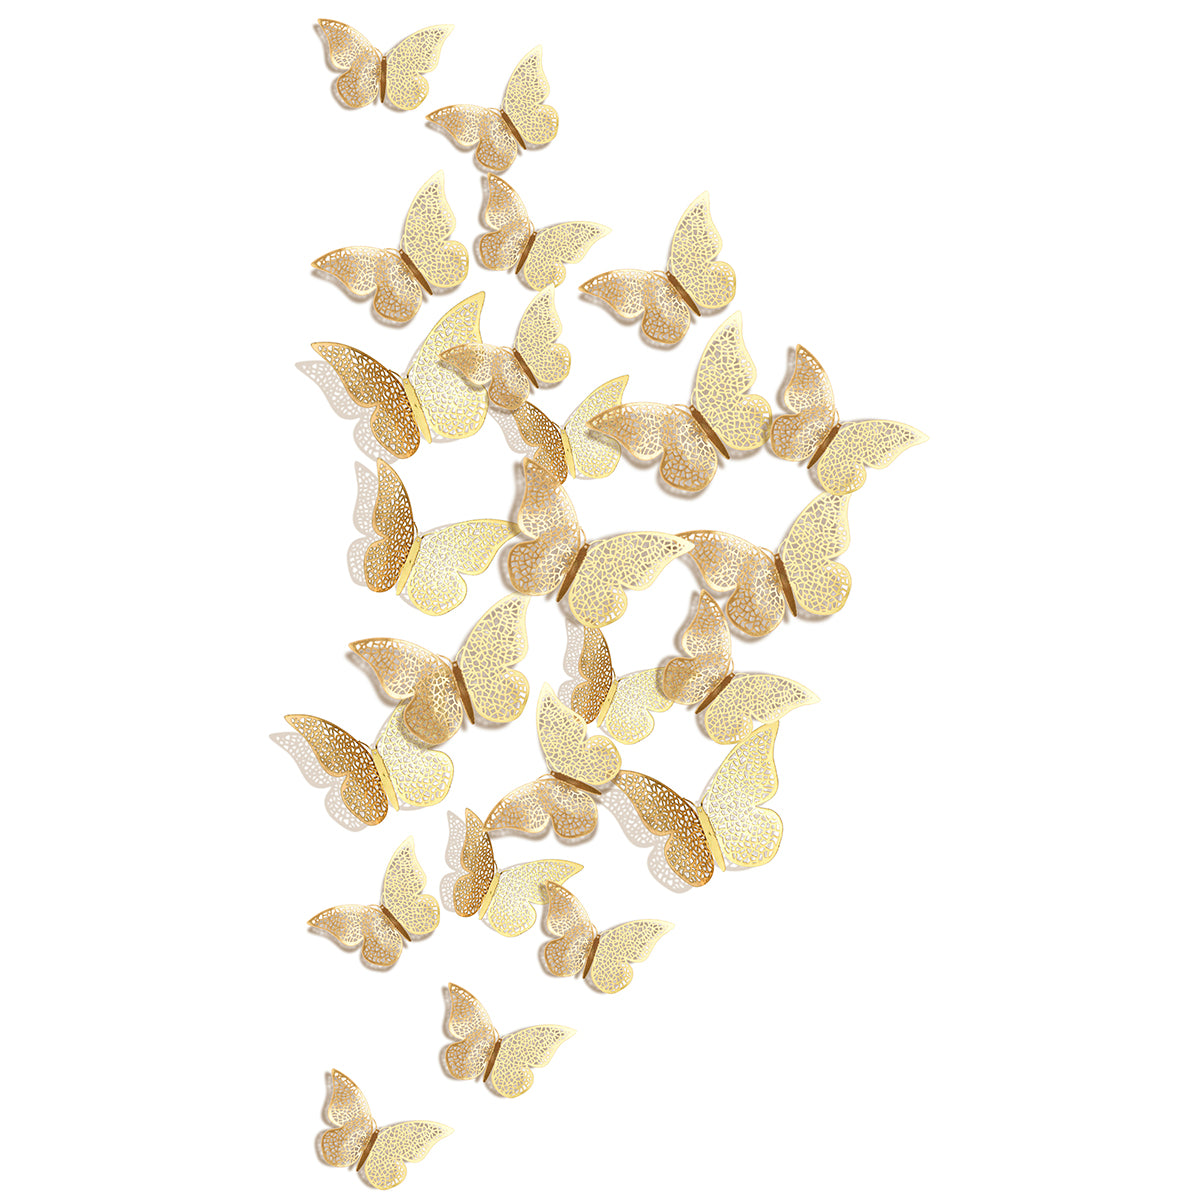 24 pieces of gold metallic butterflies with white background. The butterflies consist of 8 larges, 8 mediums, and 8 smalls